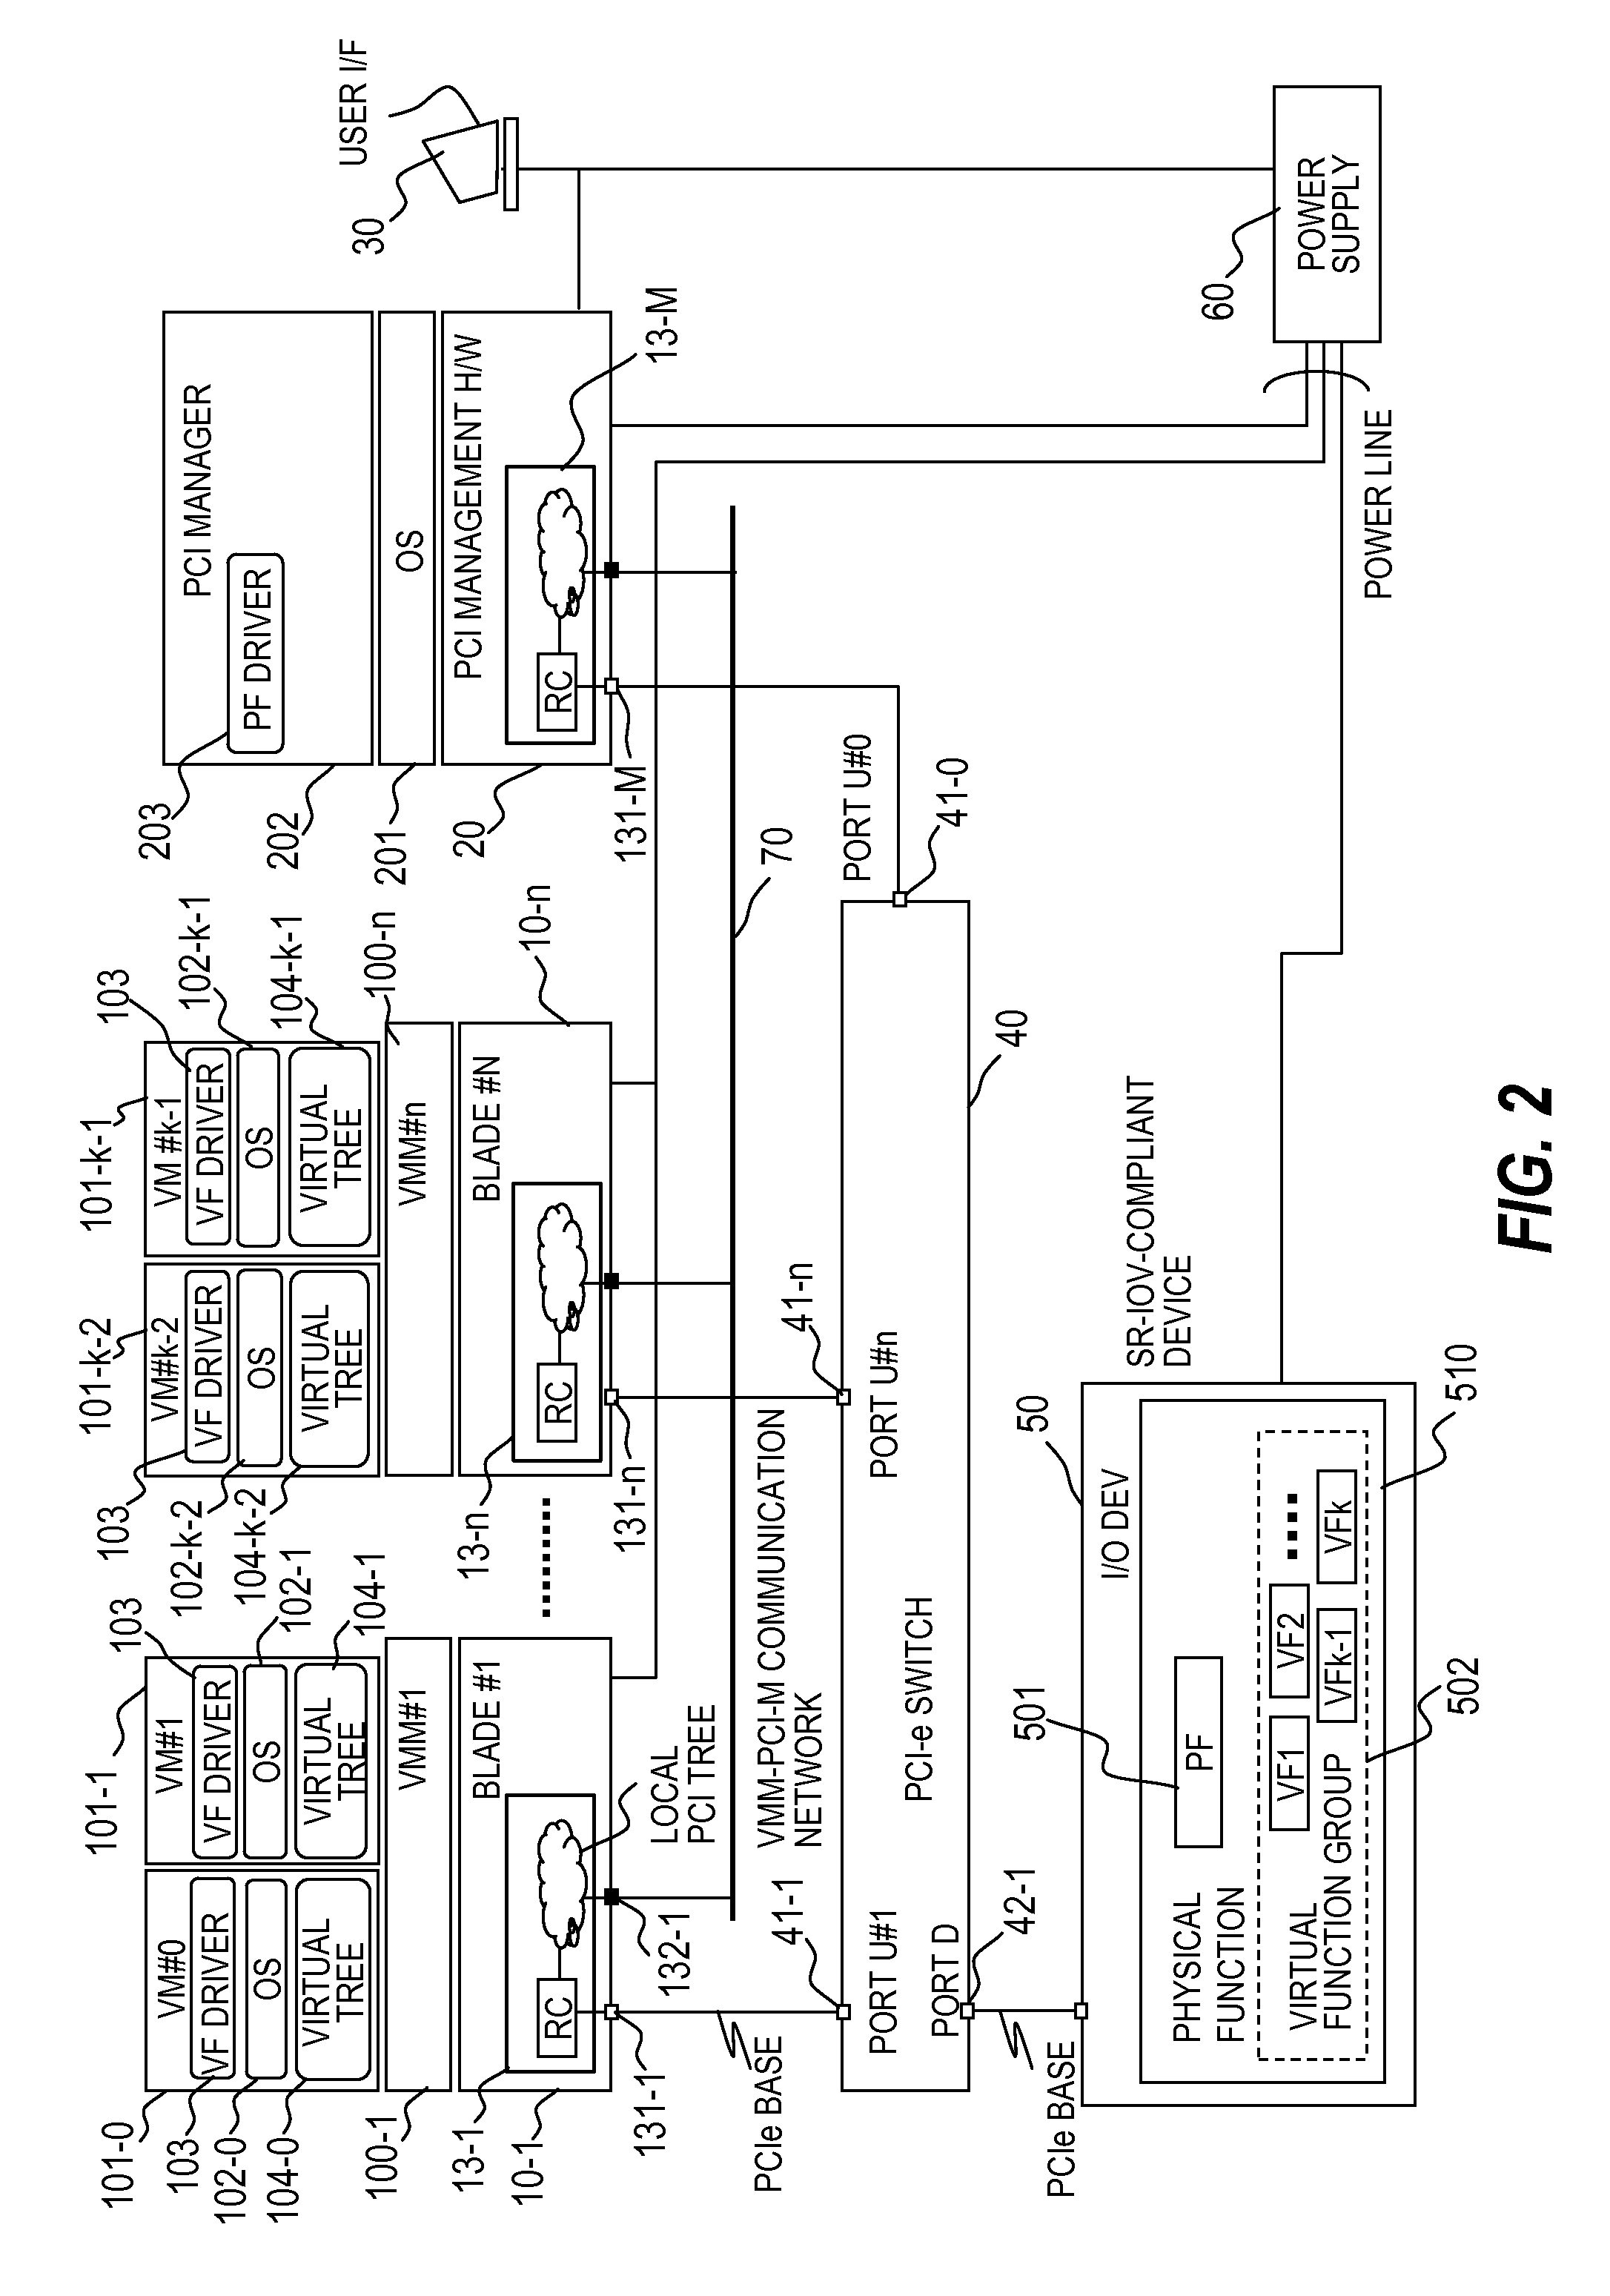 Computer system and method for sharing PCI devices thereof